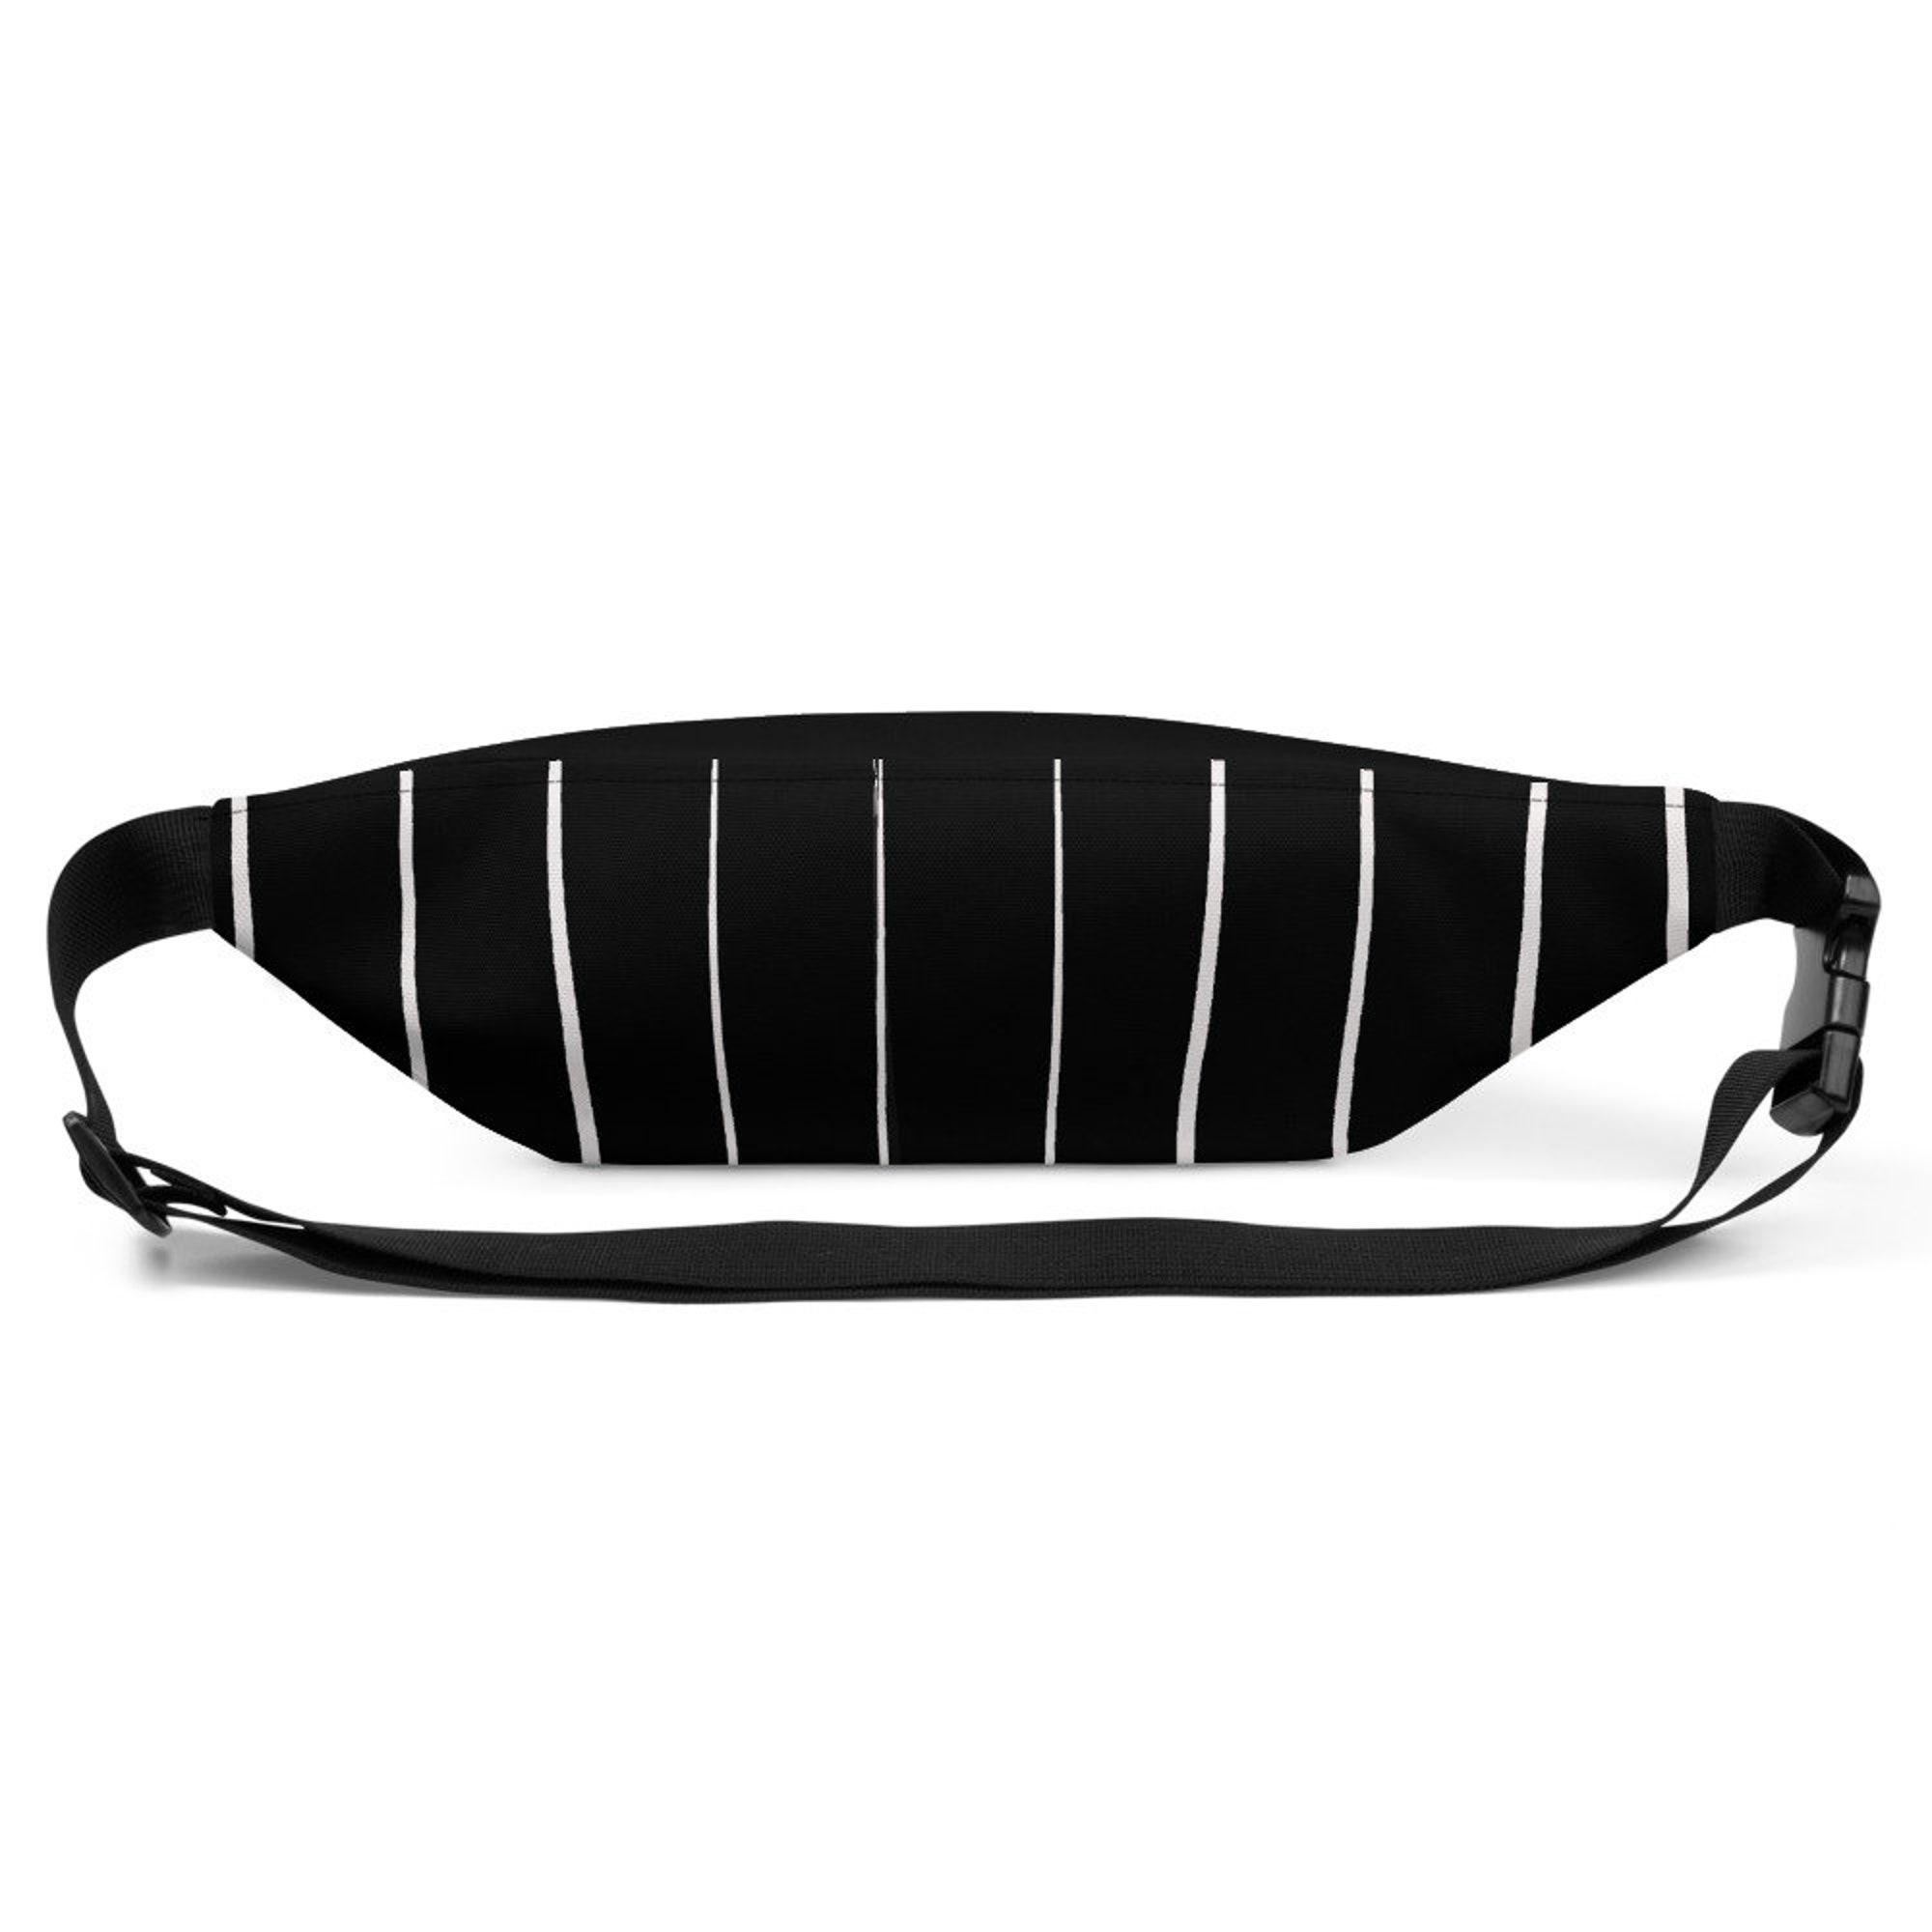 Discover Nightmare Before Christmas Jack Skellington inspired Fanny Pack